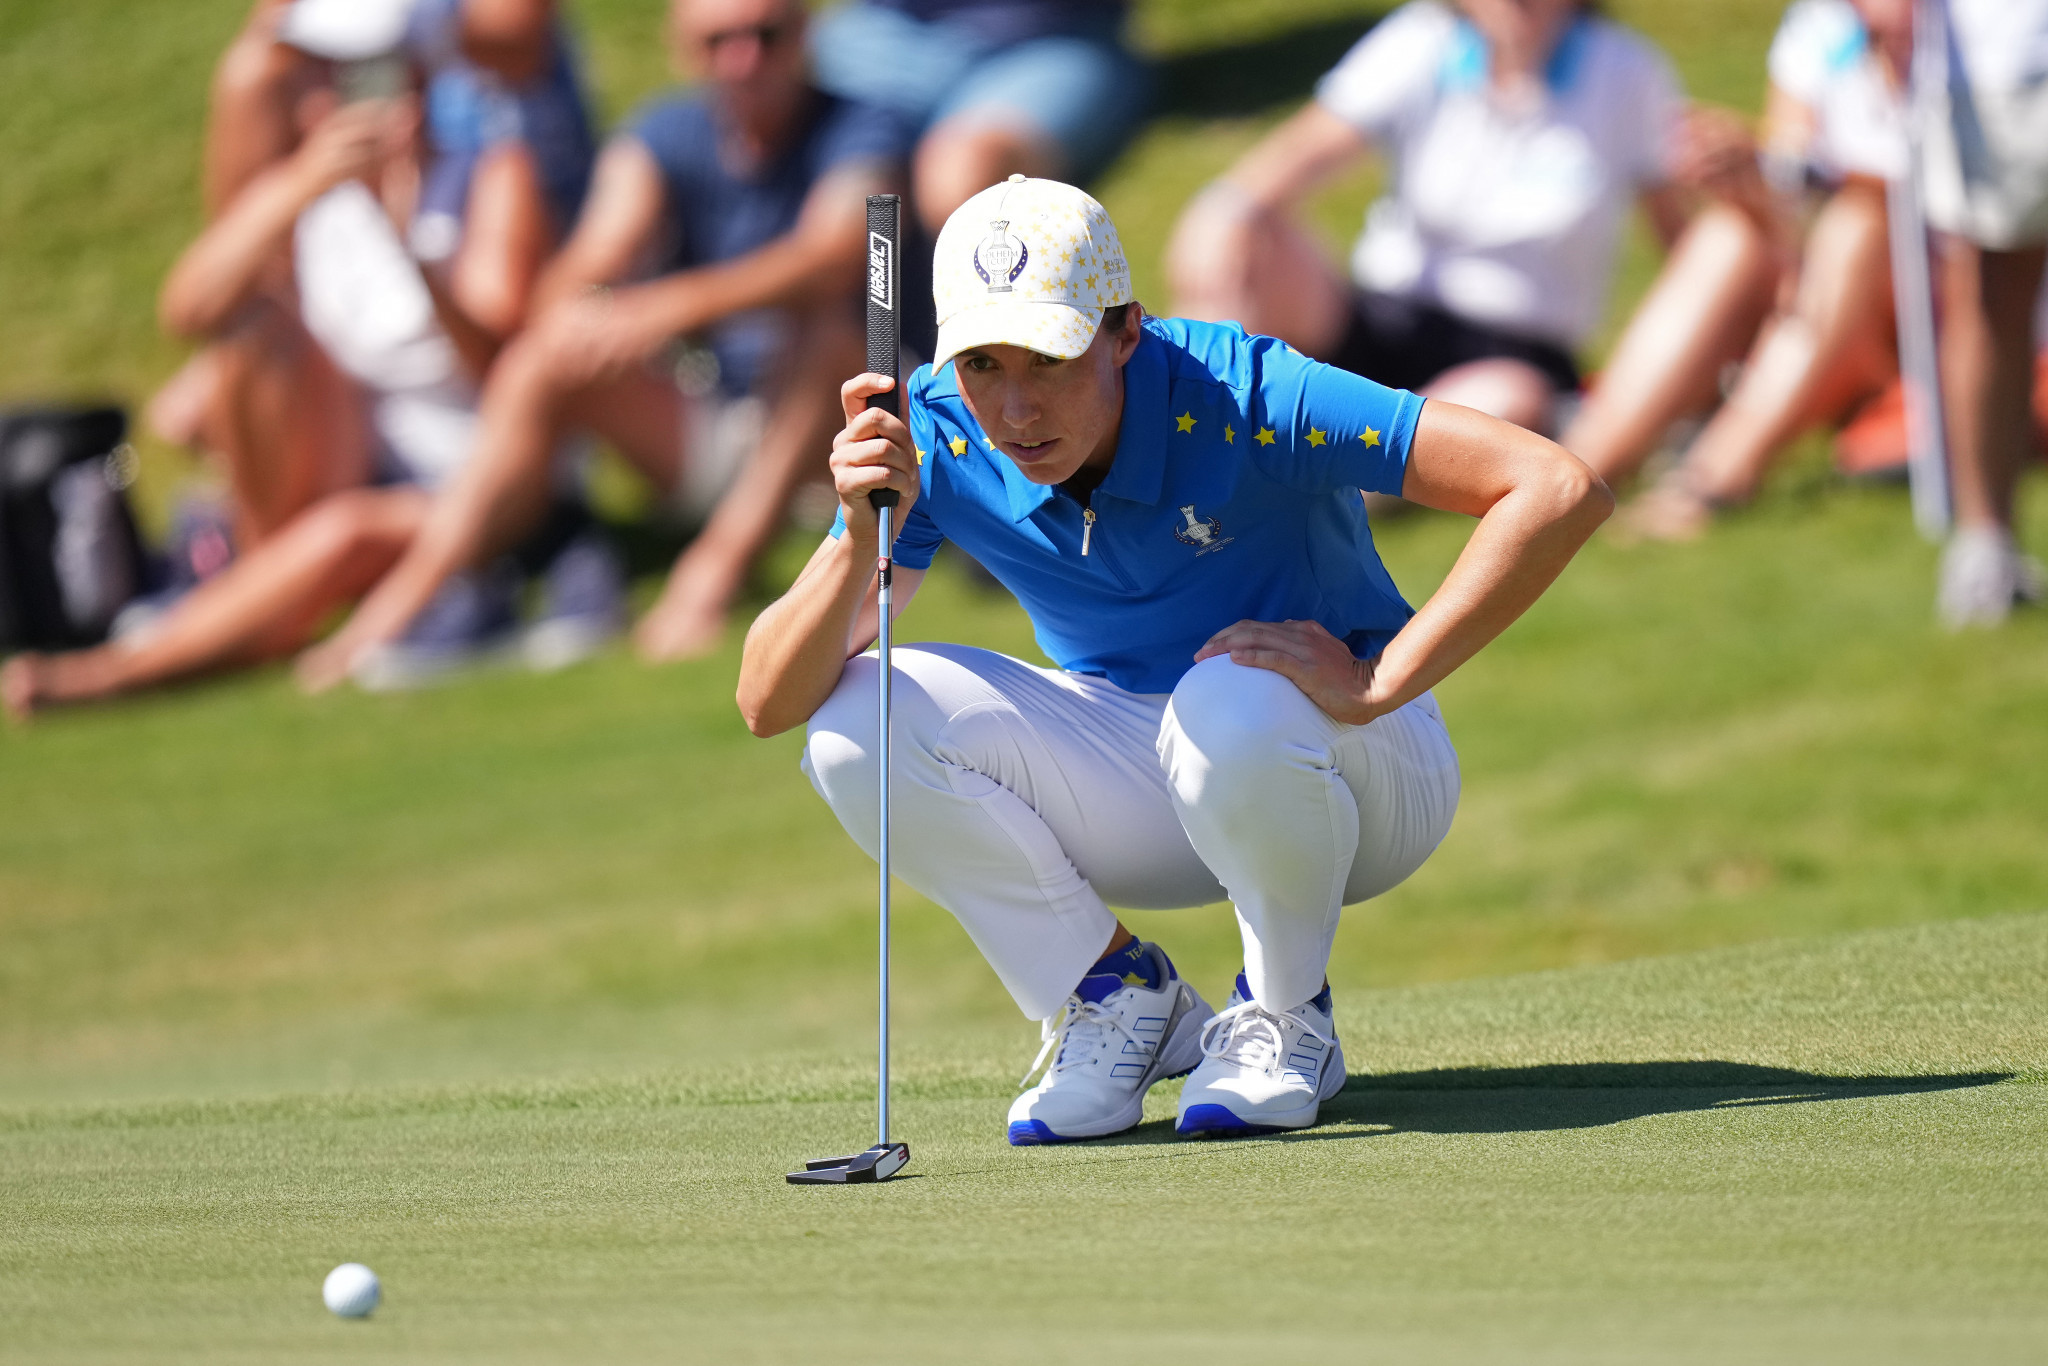 Spain's Carlota Ciganda holed the crucial putt in her match which ensured Europe retained the Solheim Cup ©Getty Images